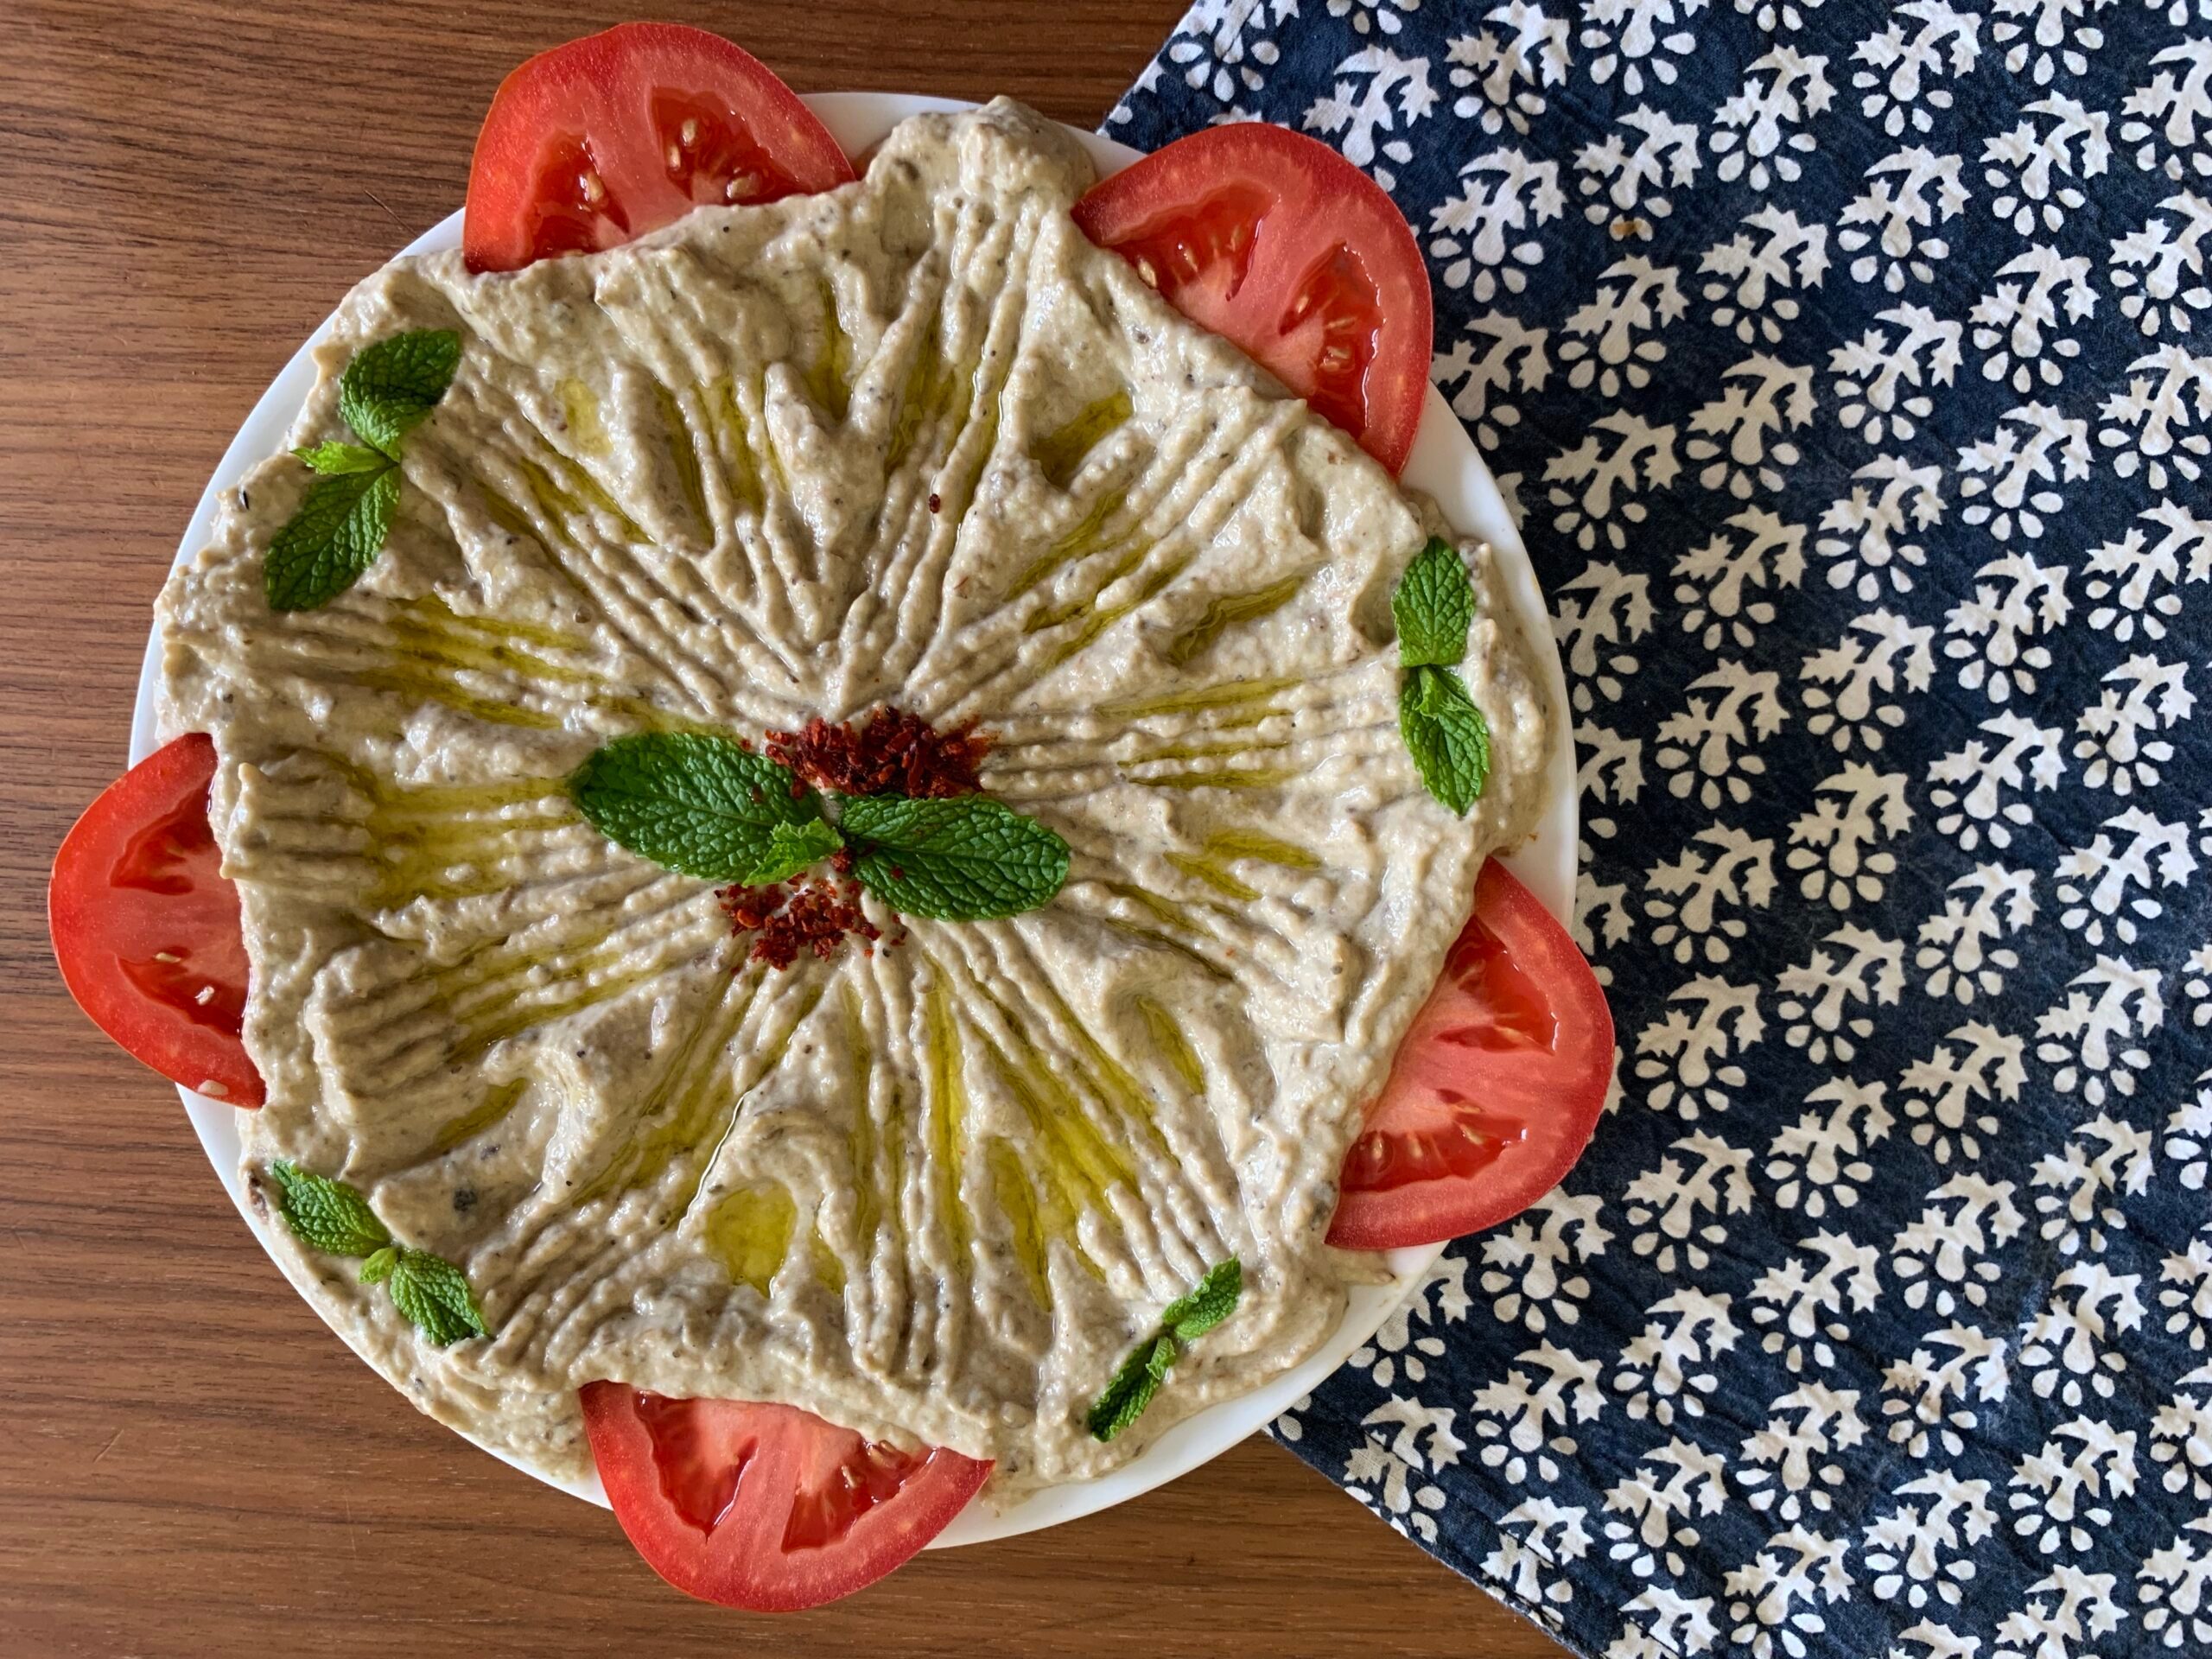 A decorative cloth and a plate of soft mutabal with mint, olive oil, parsley, and chili flake garnishes.